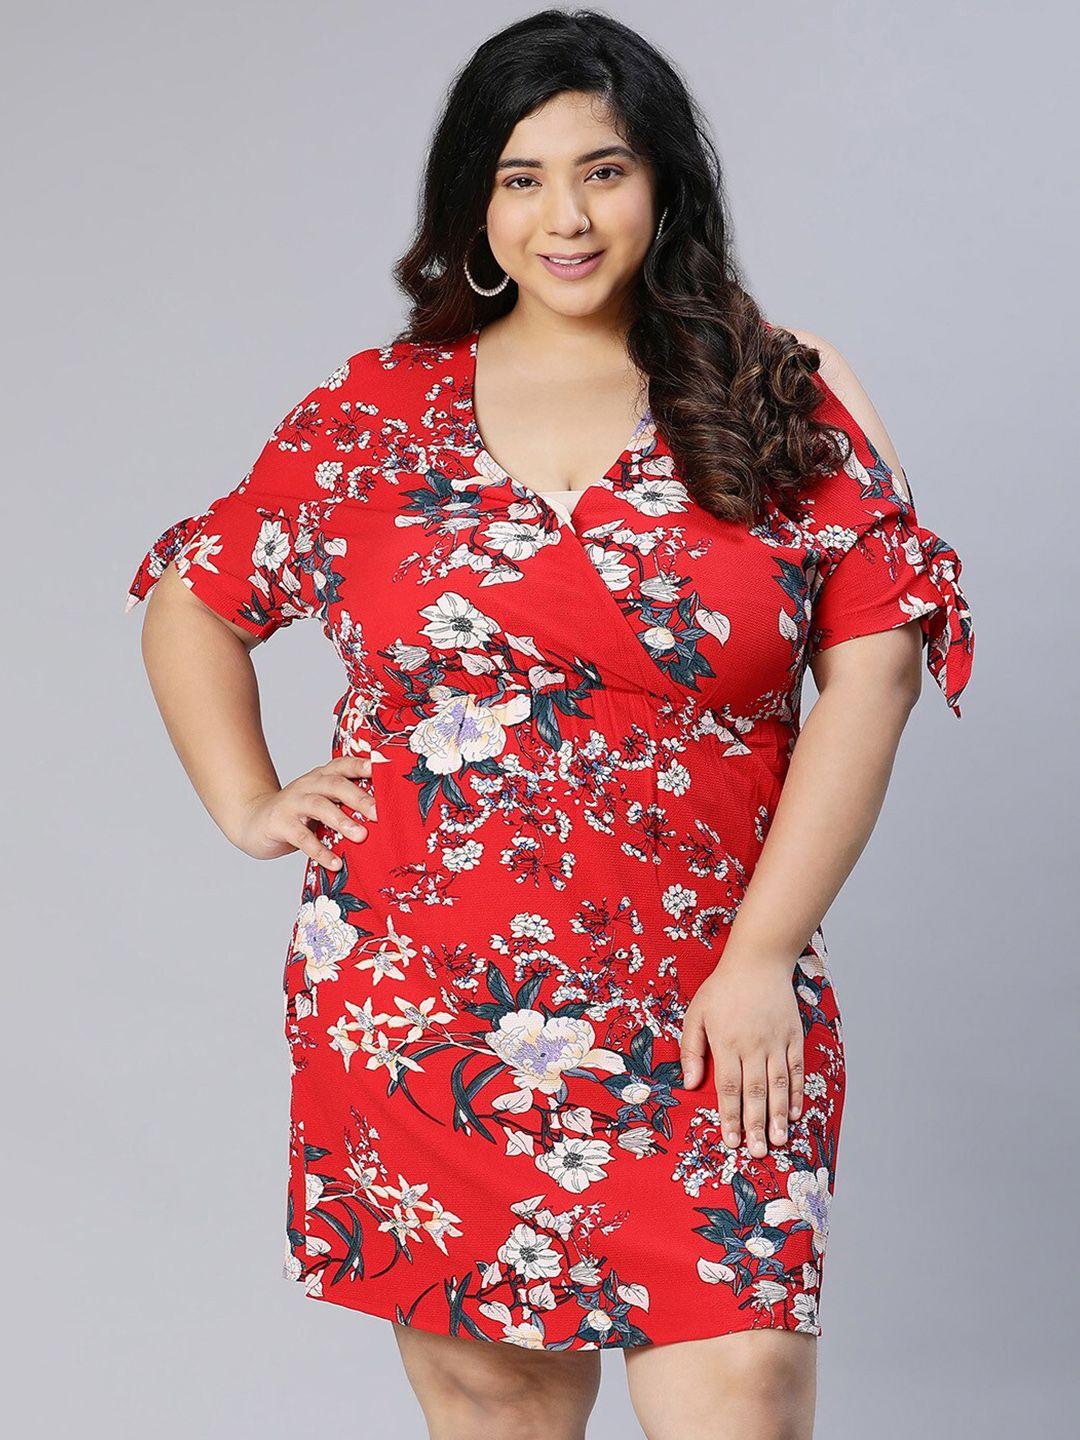 oxolloxo plus size floral dress